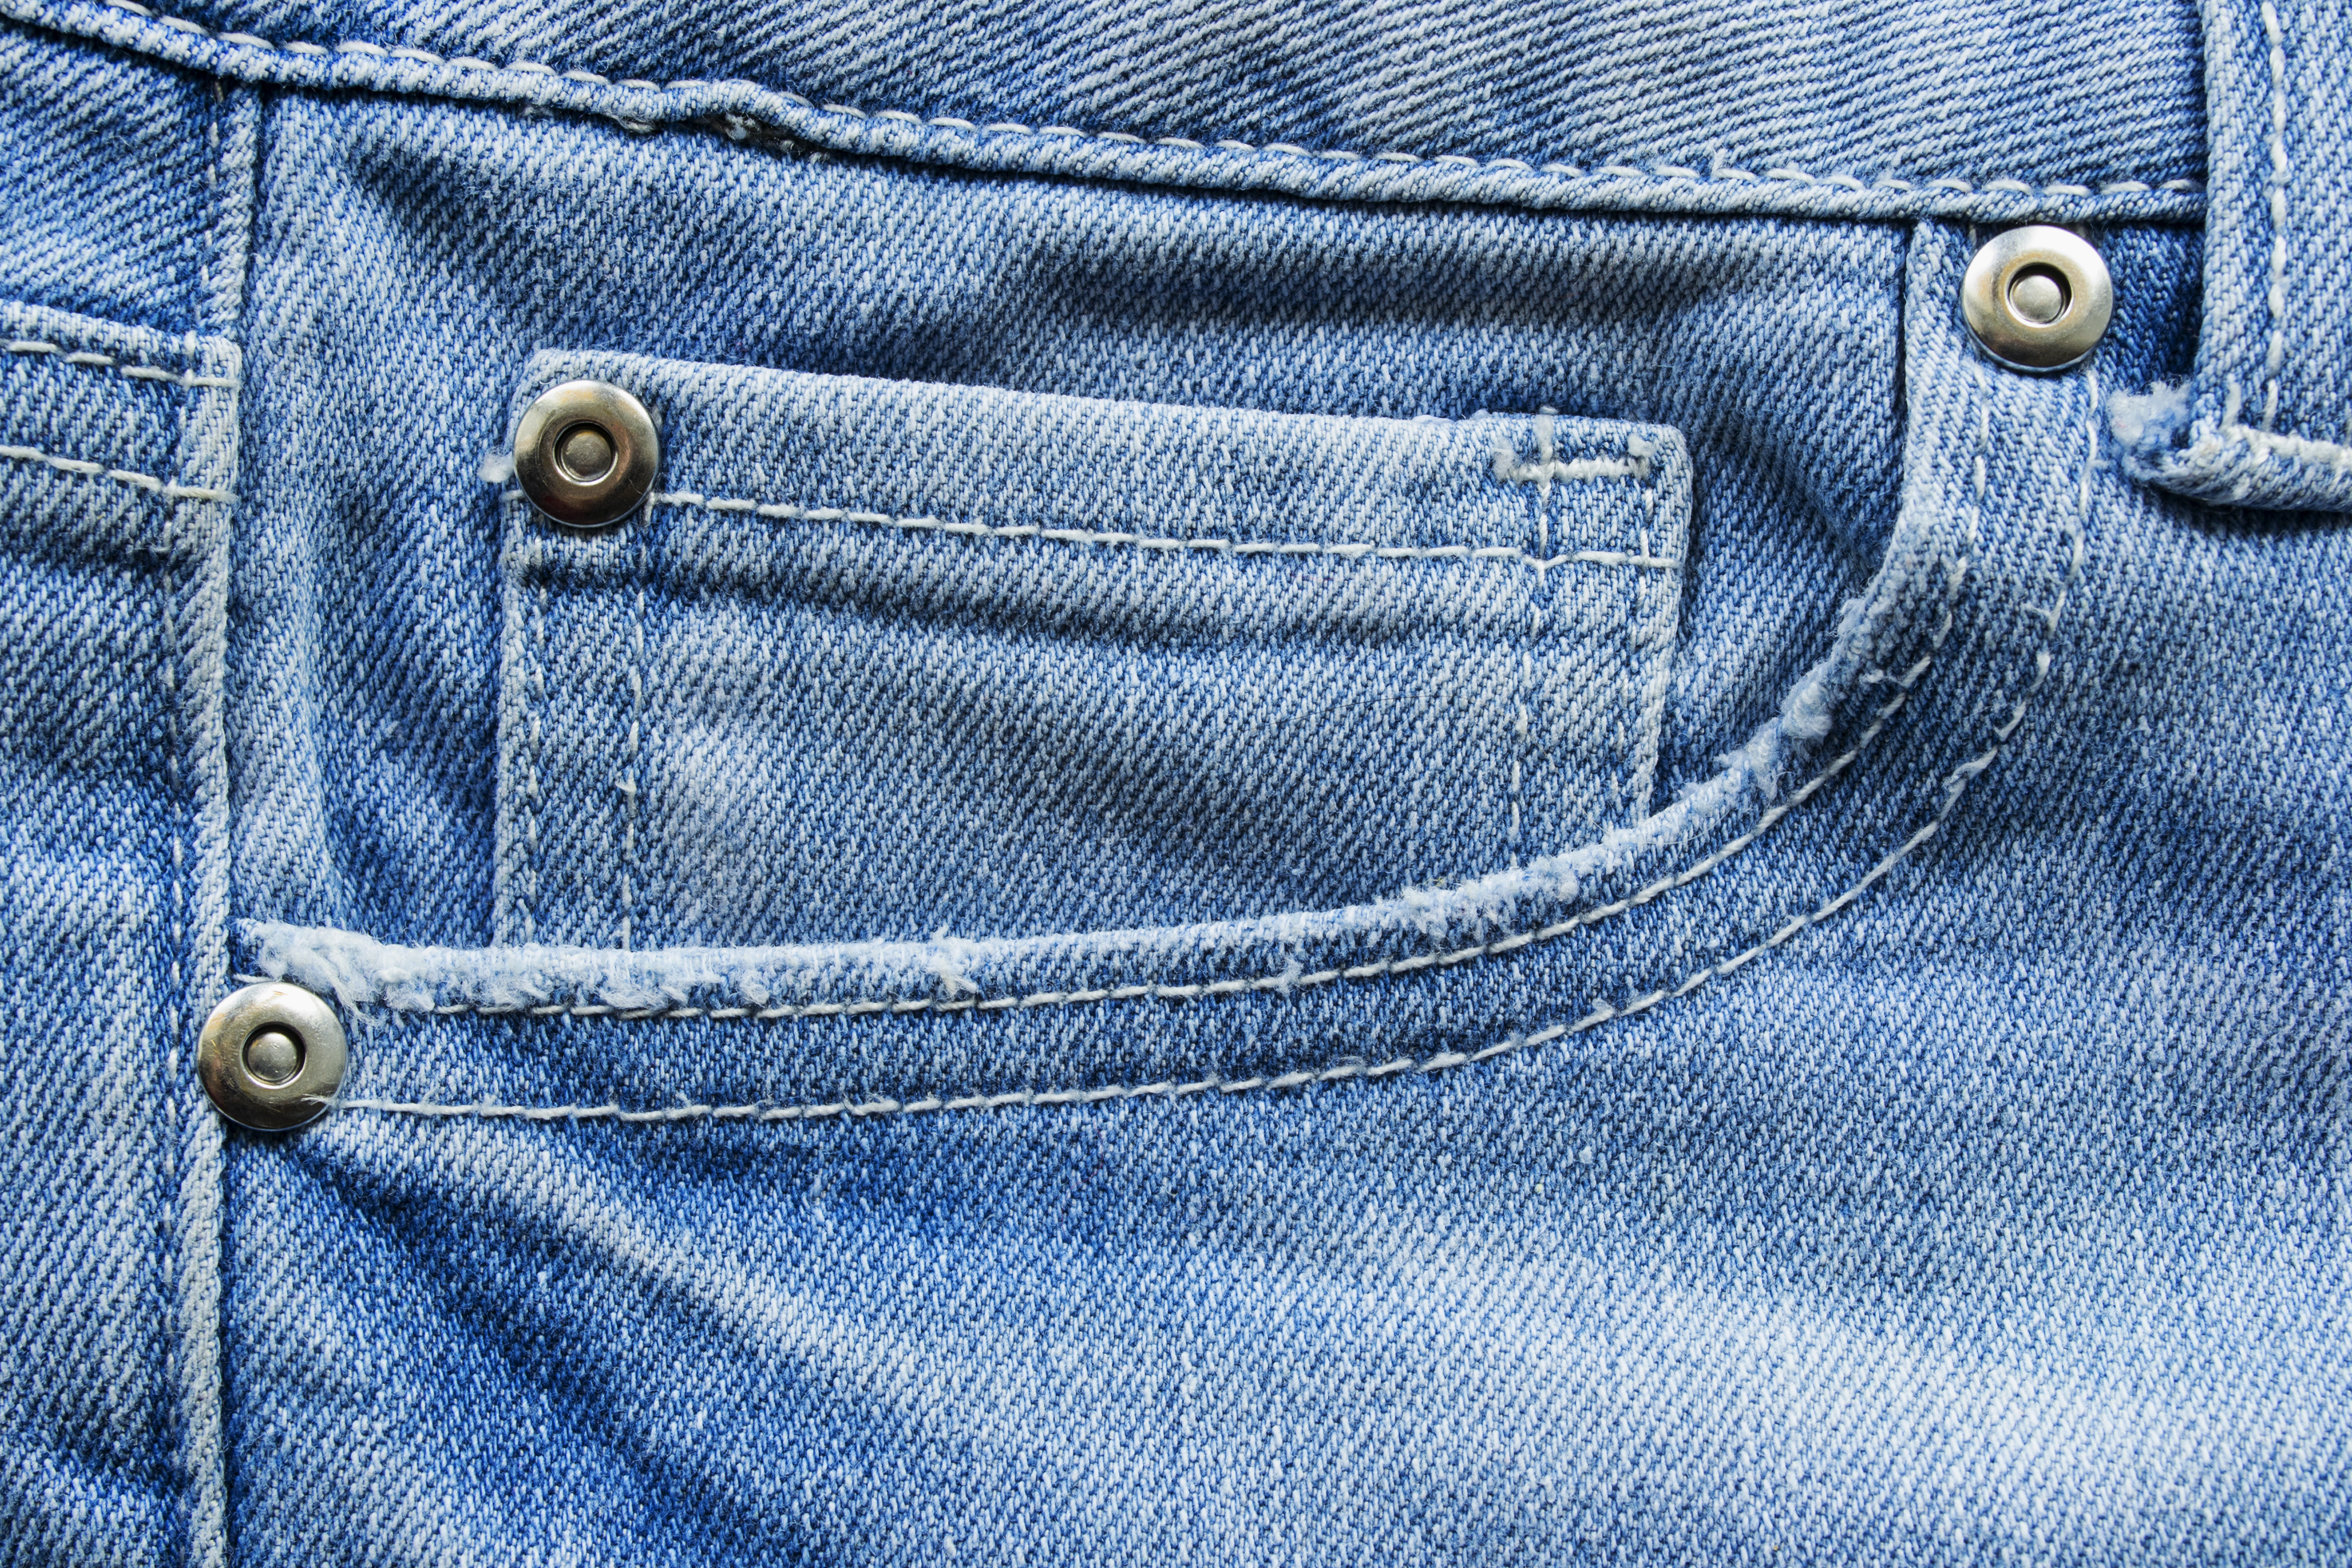 This is what those little metal buttons on your jeans are really for